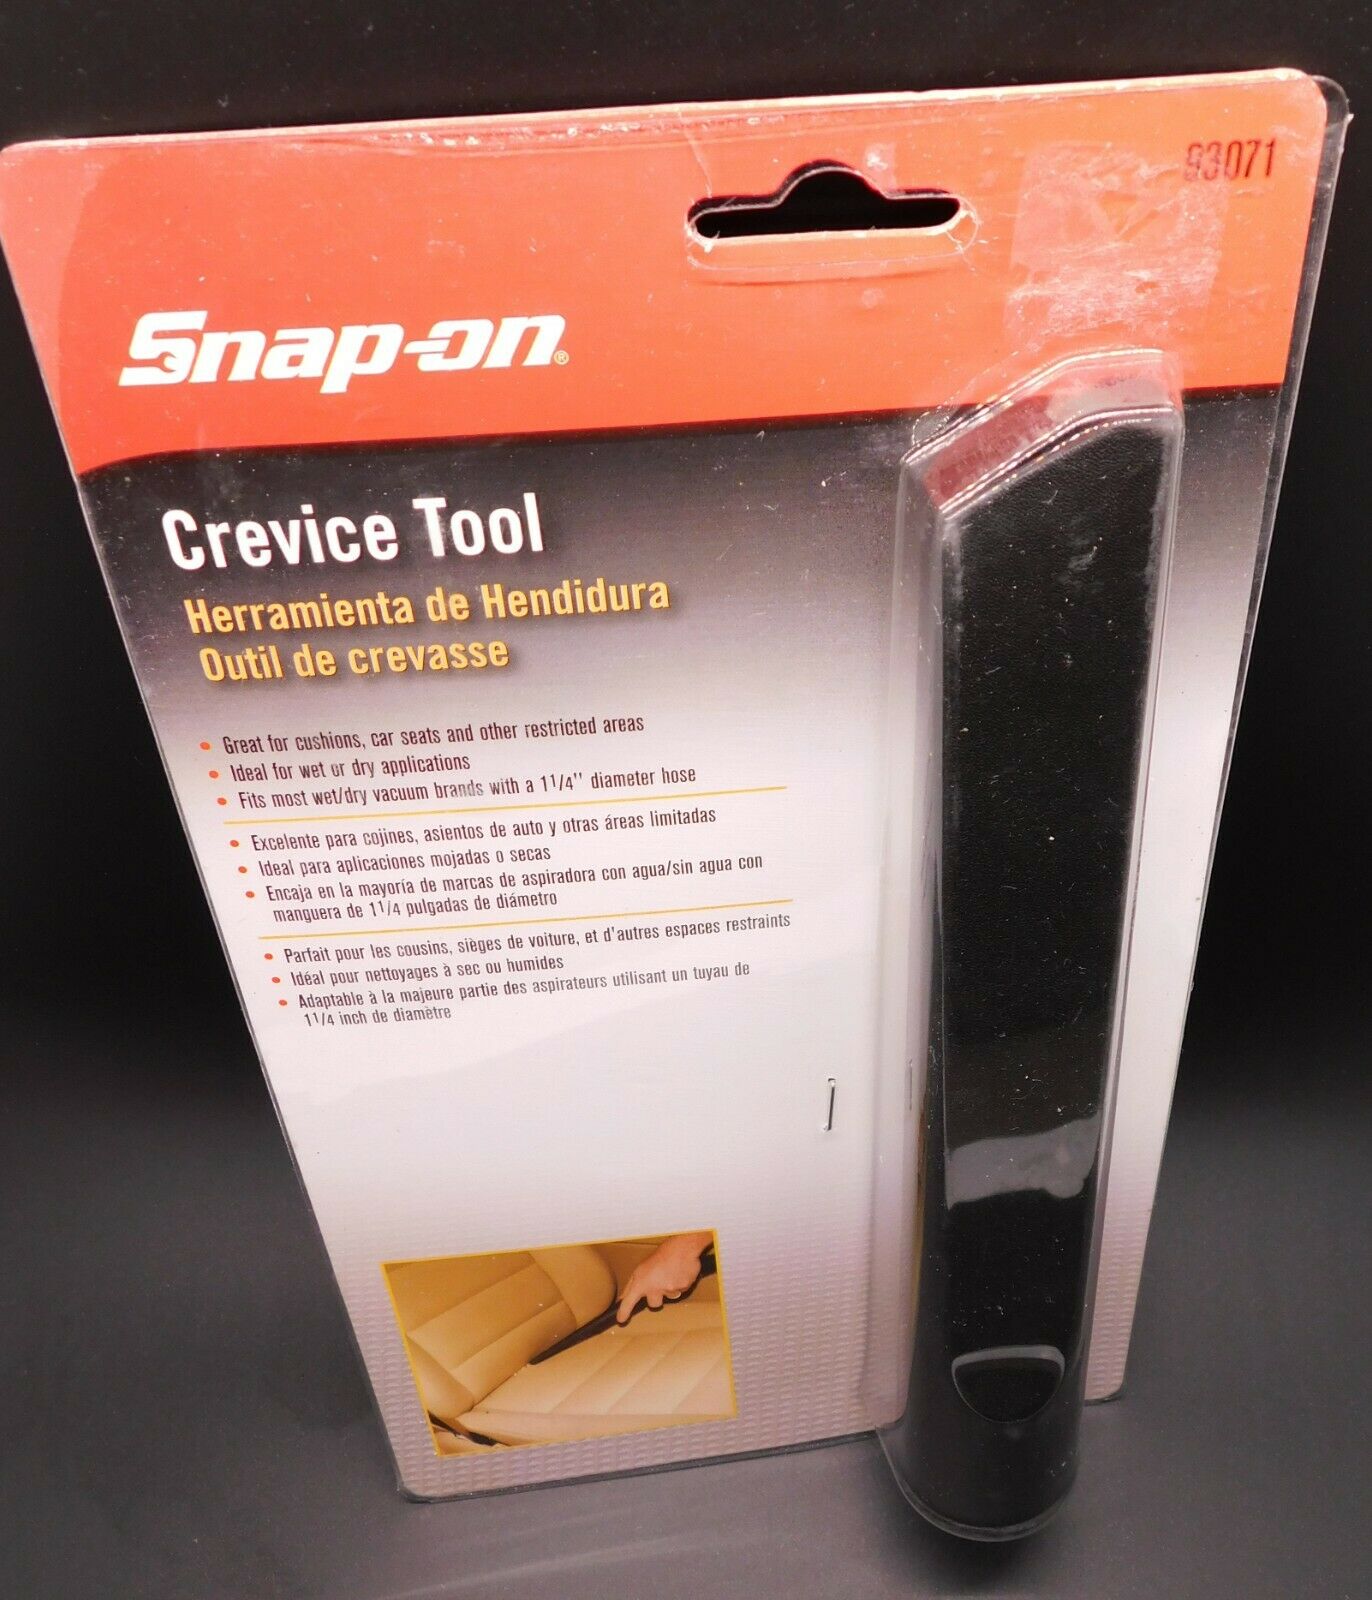 Snap-on Tools Crevice Tool Wet / Dry Vacuum Hose Attachment Unopened 93071